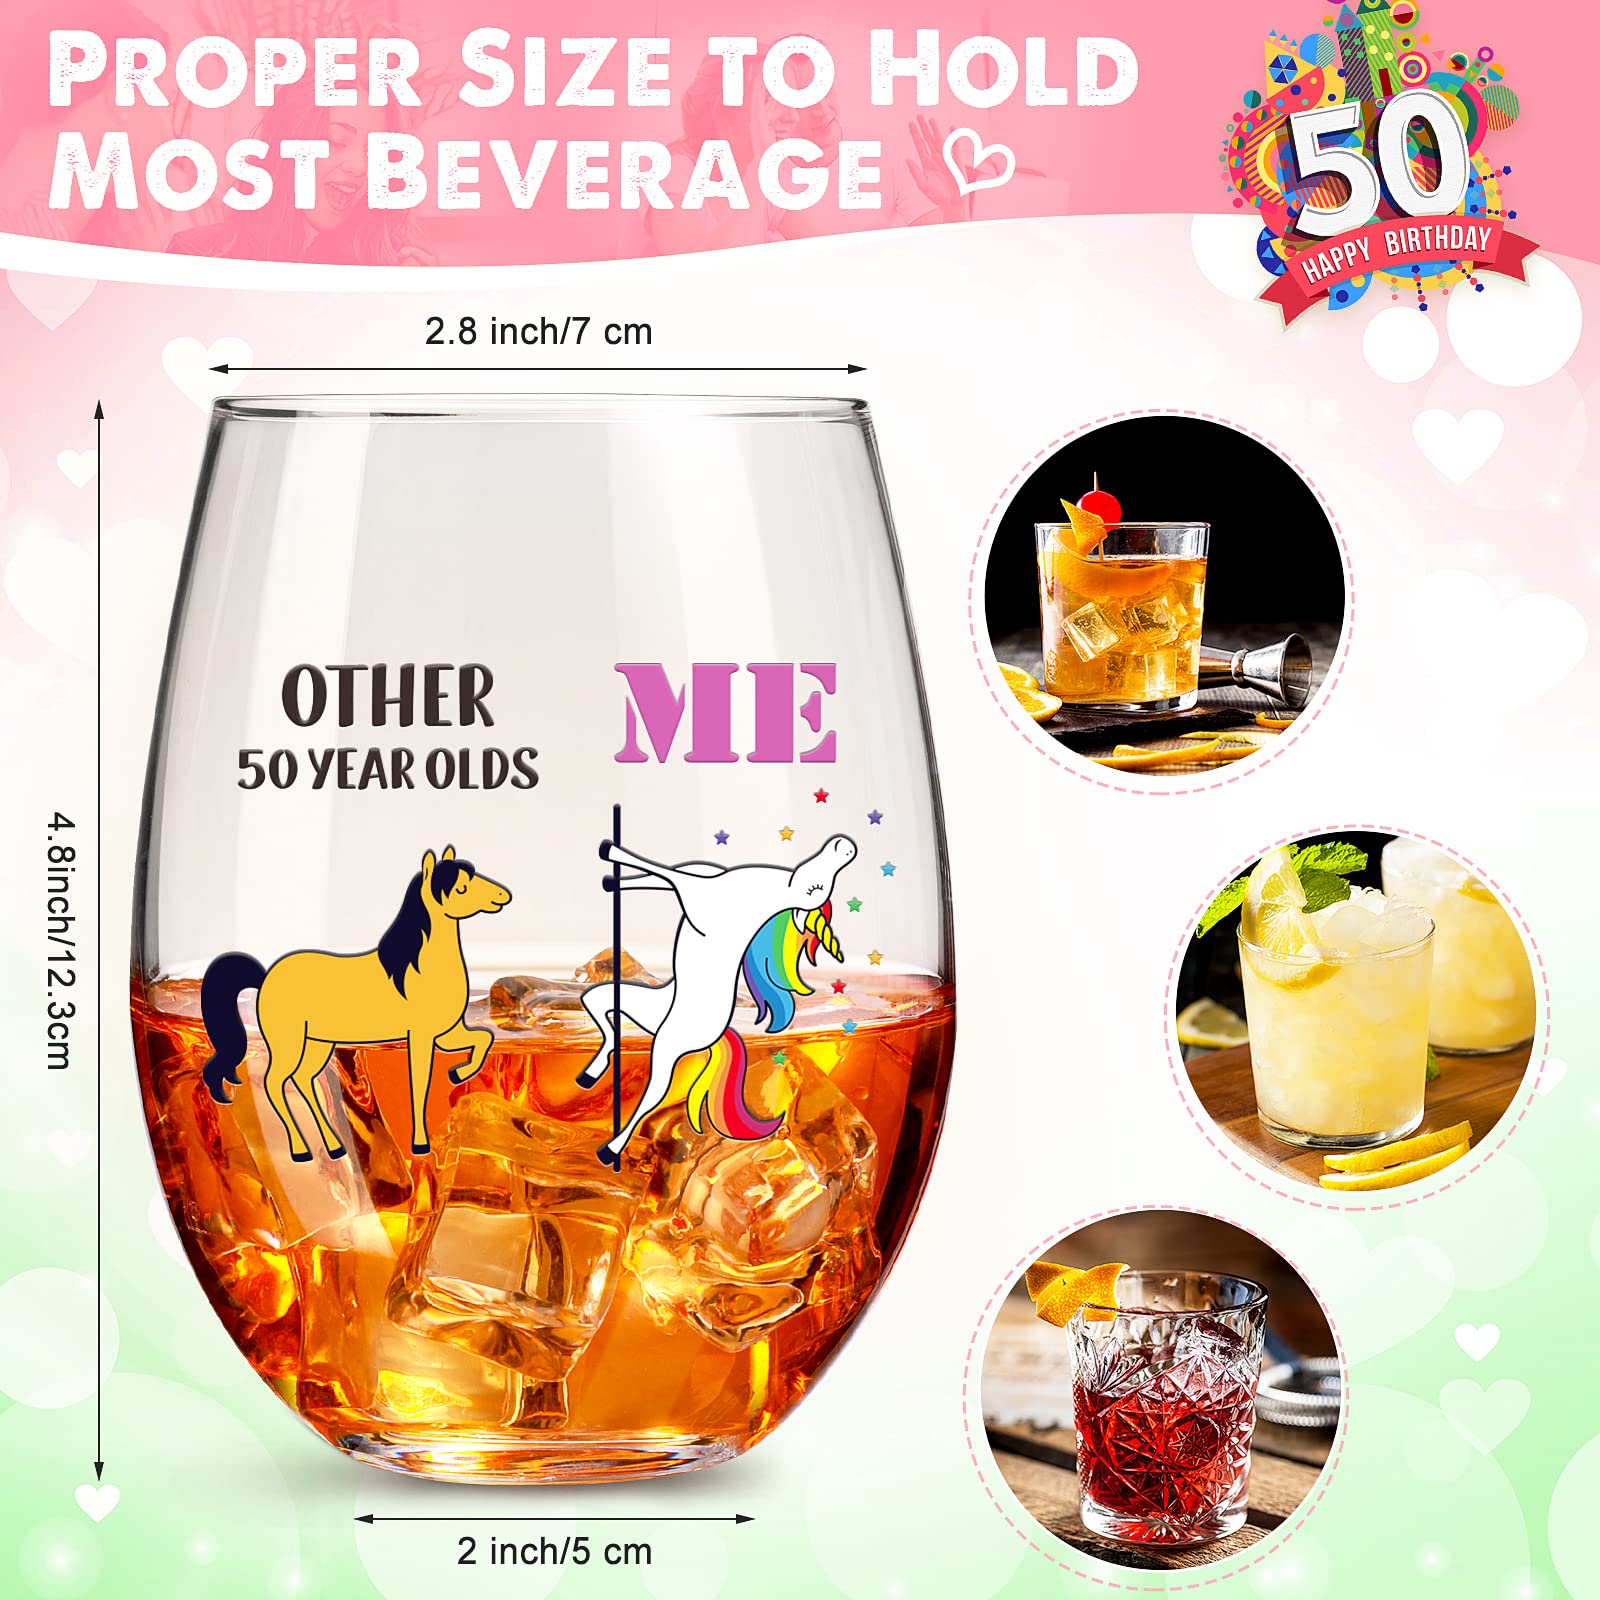 Patelai Birthday Gifts for Women Men Friends, Other 40/50 Year Olds Me Unicorn Wine Glass, Personalized 40th 50th 17oz Stemless Wine Glass Gifts for BFF, Coworker, Mom, Dad (Other 50 Year Olds Me)